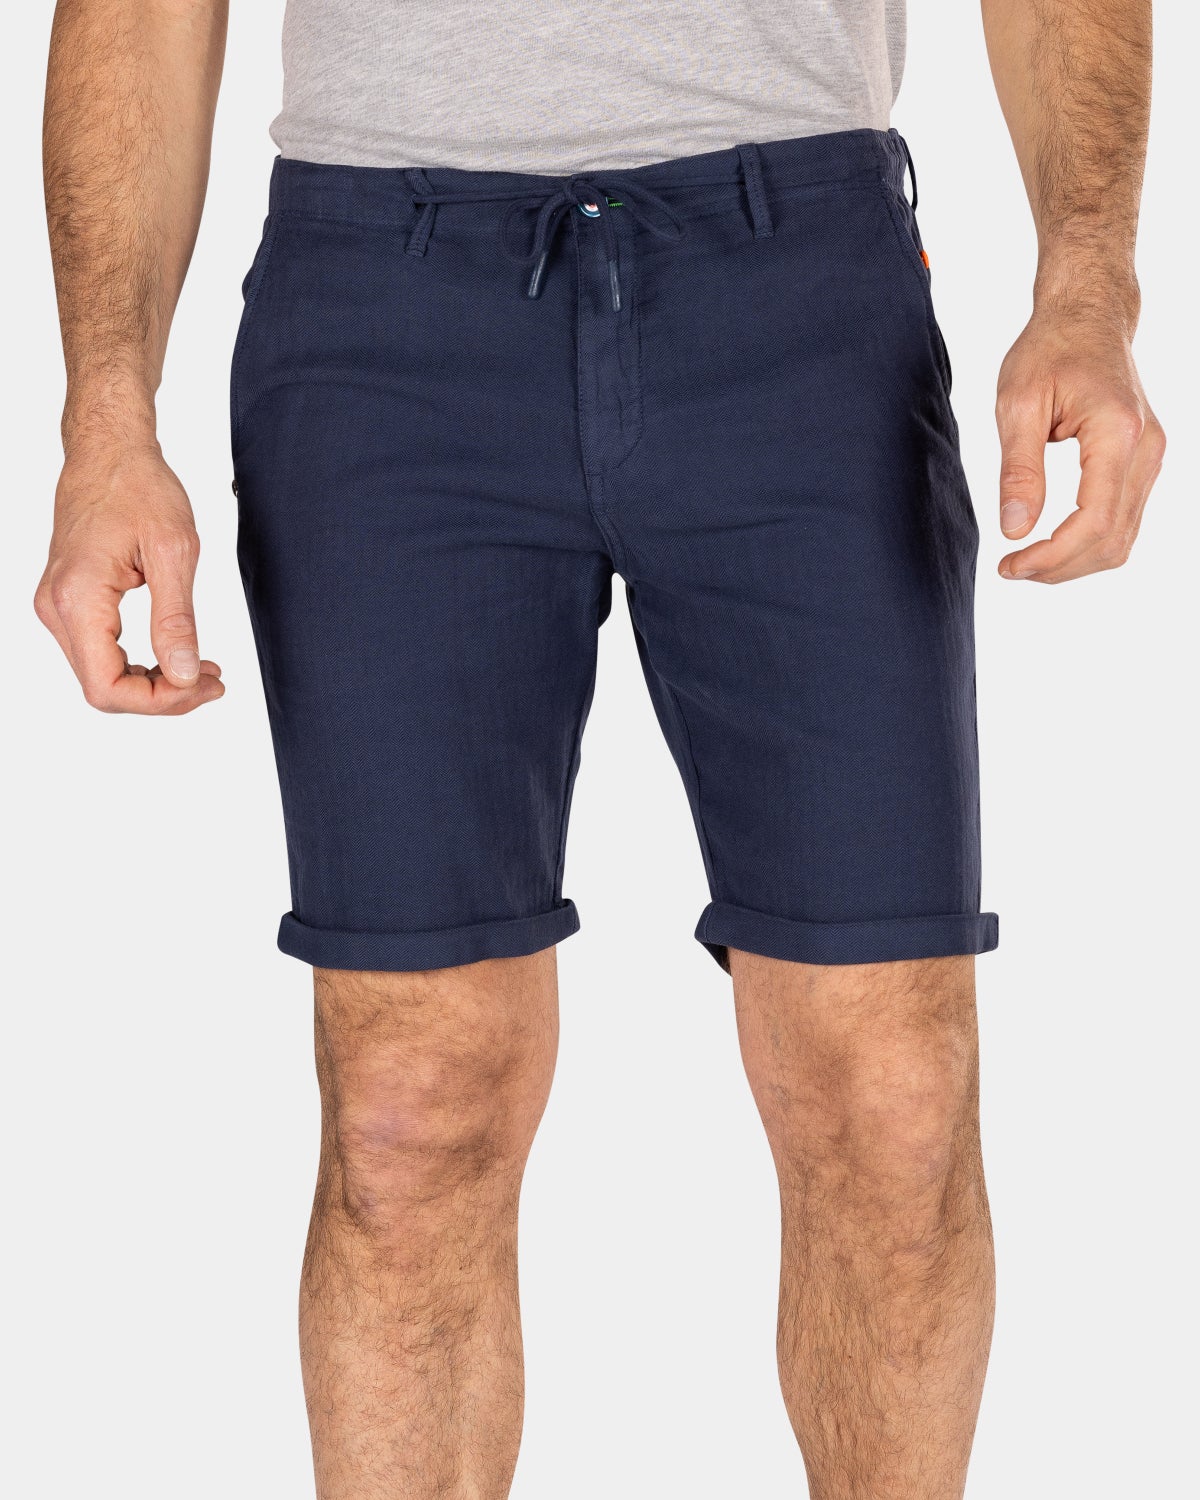 Shorts made of cotton and linen - Ocean Navy